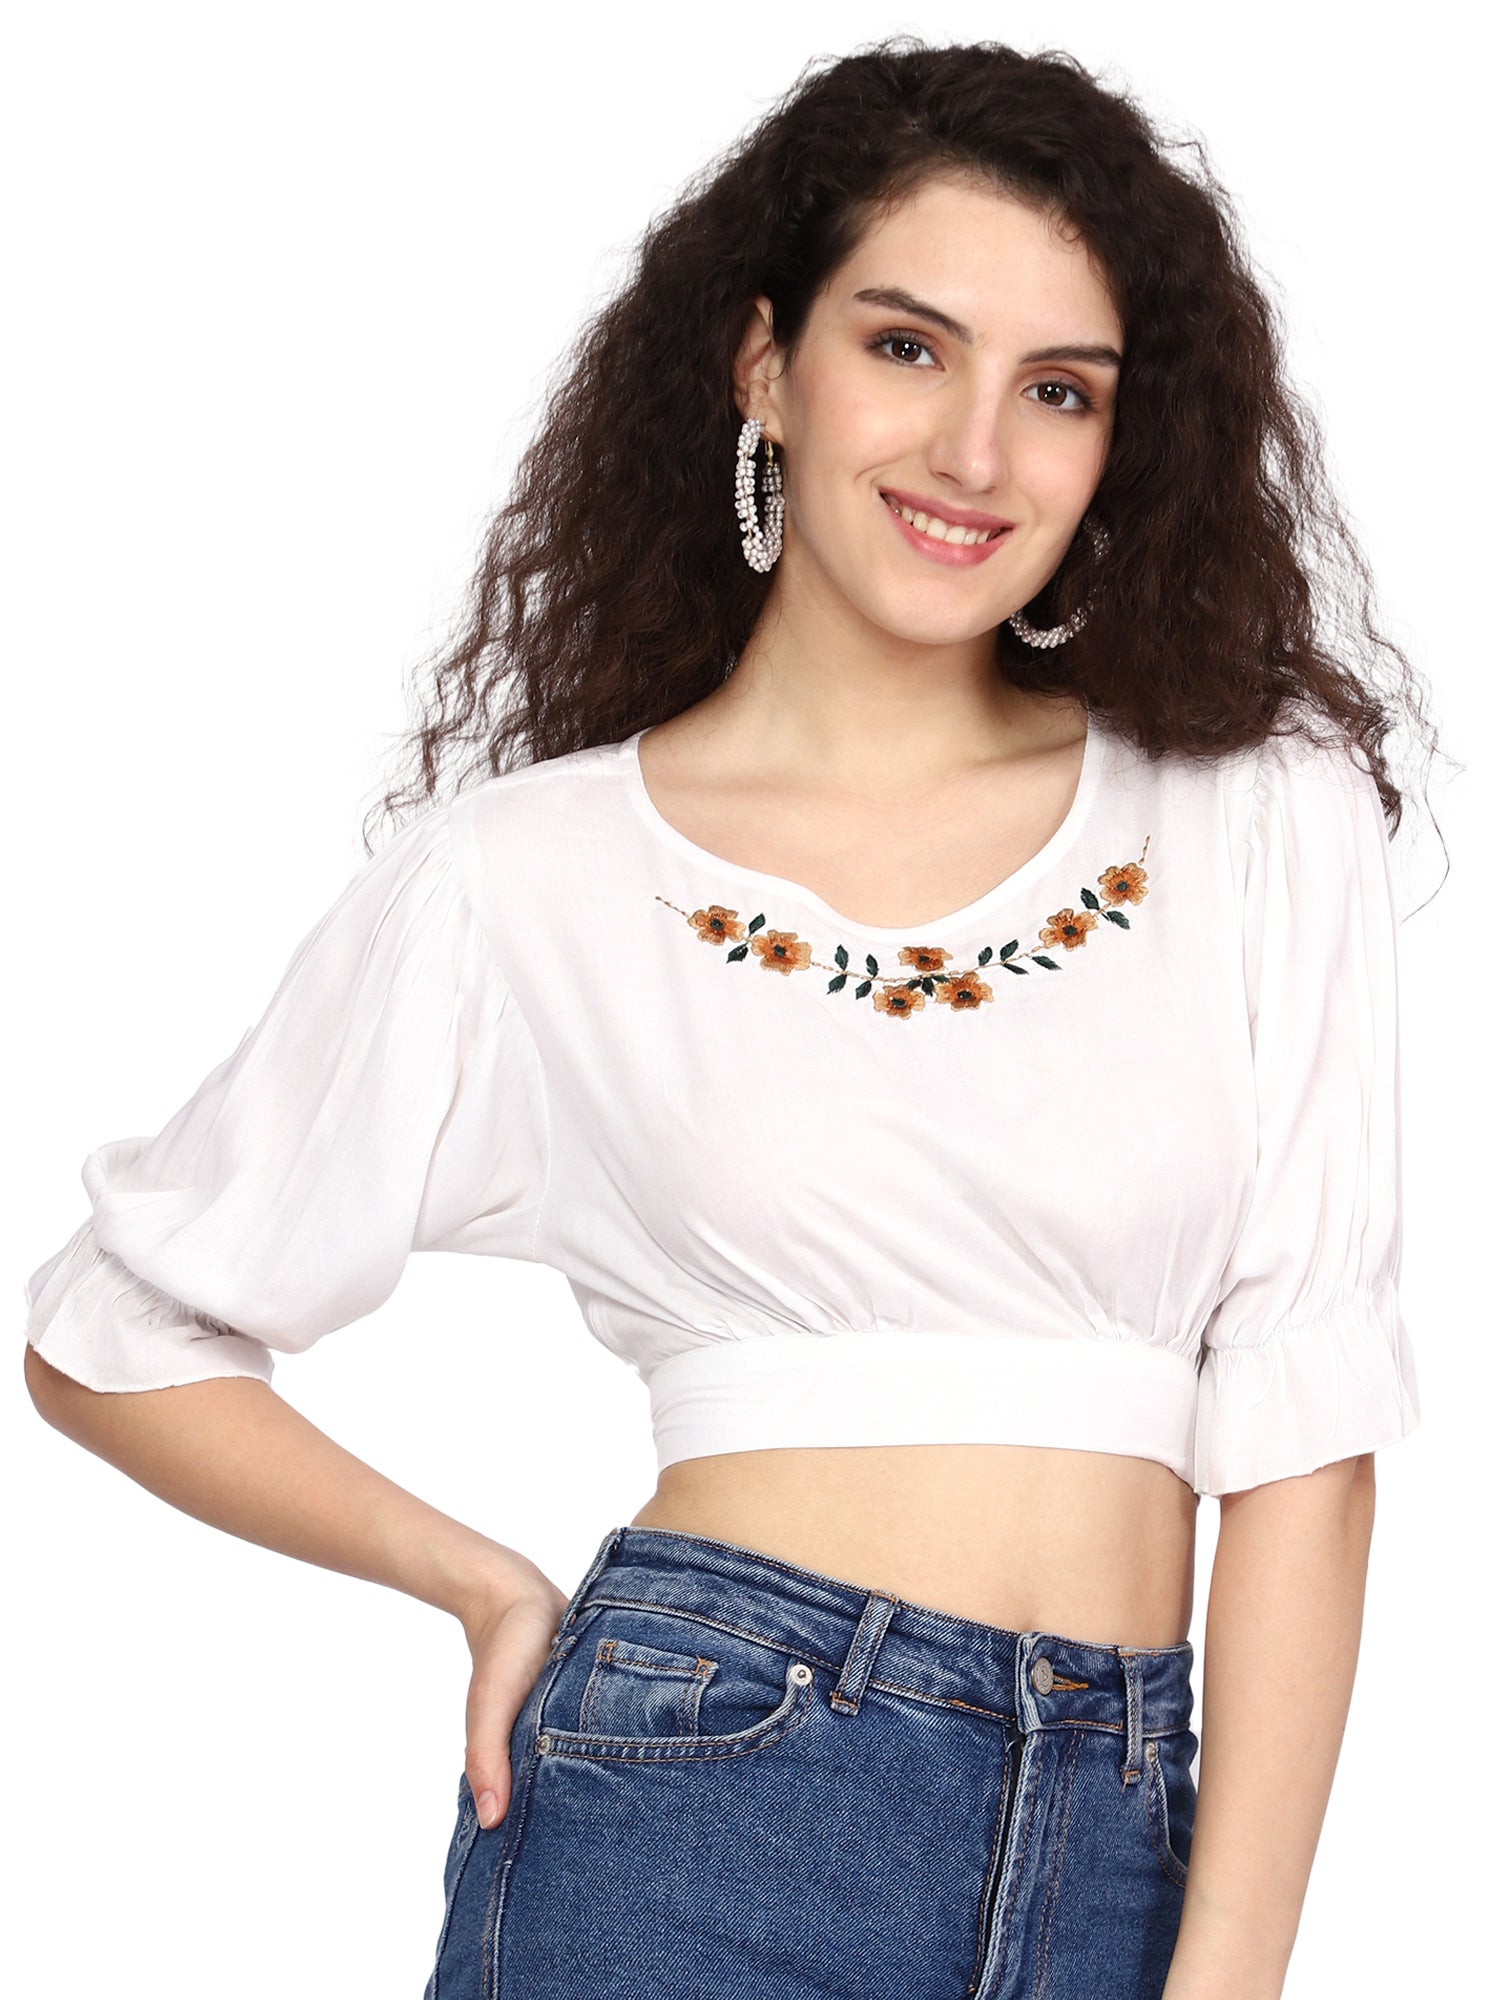 Chic Embroidered Half Sleeves Crop Top